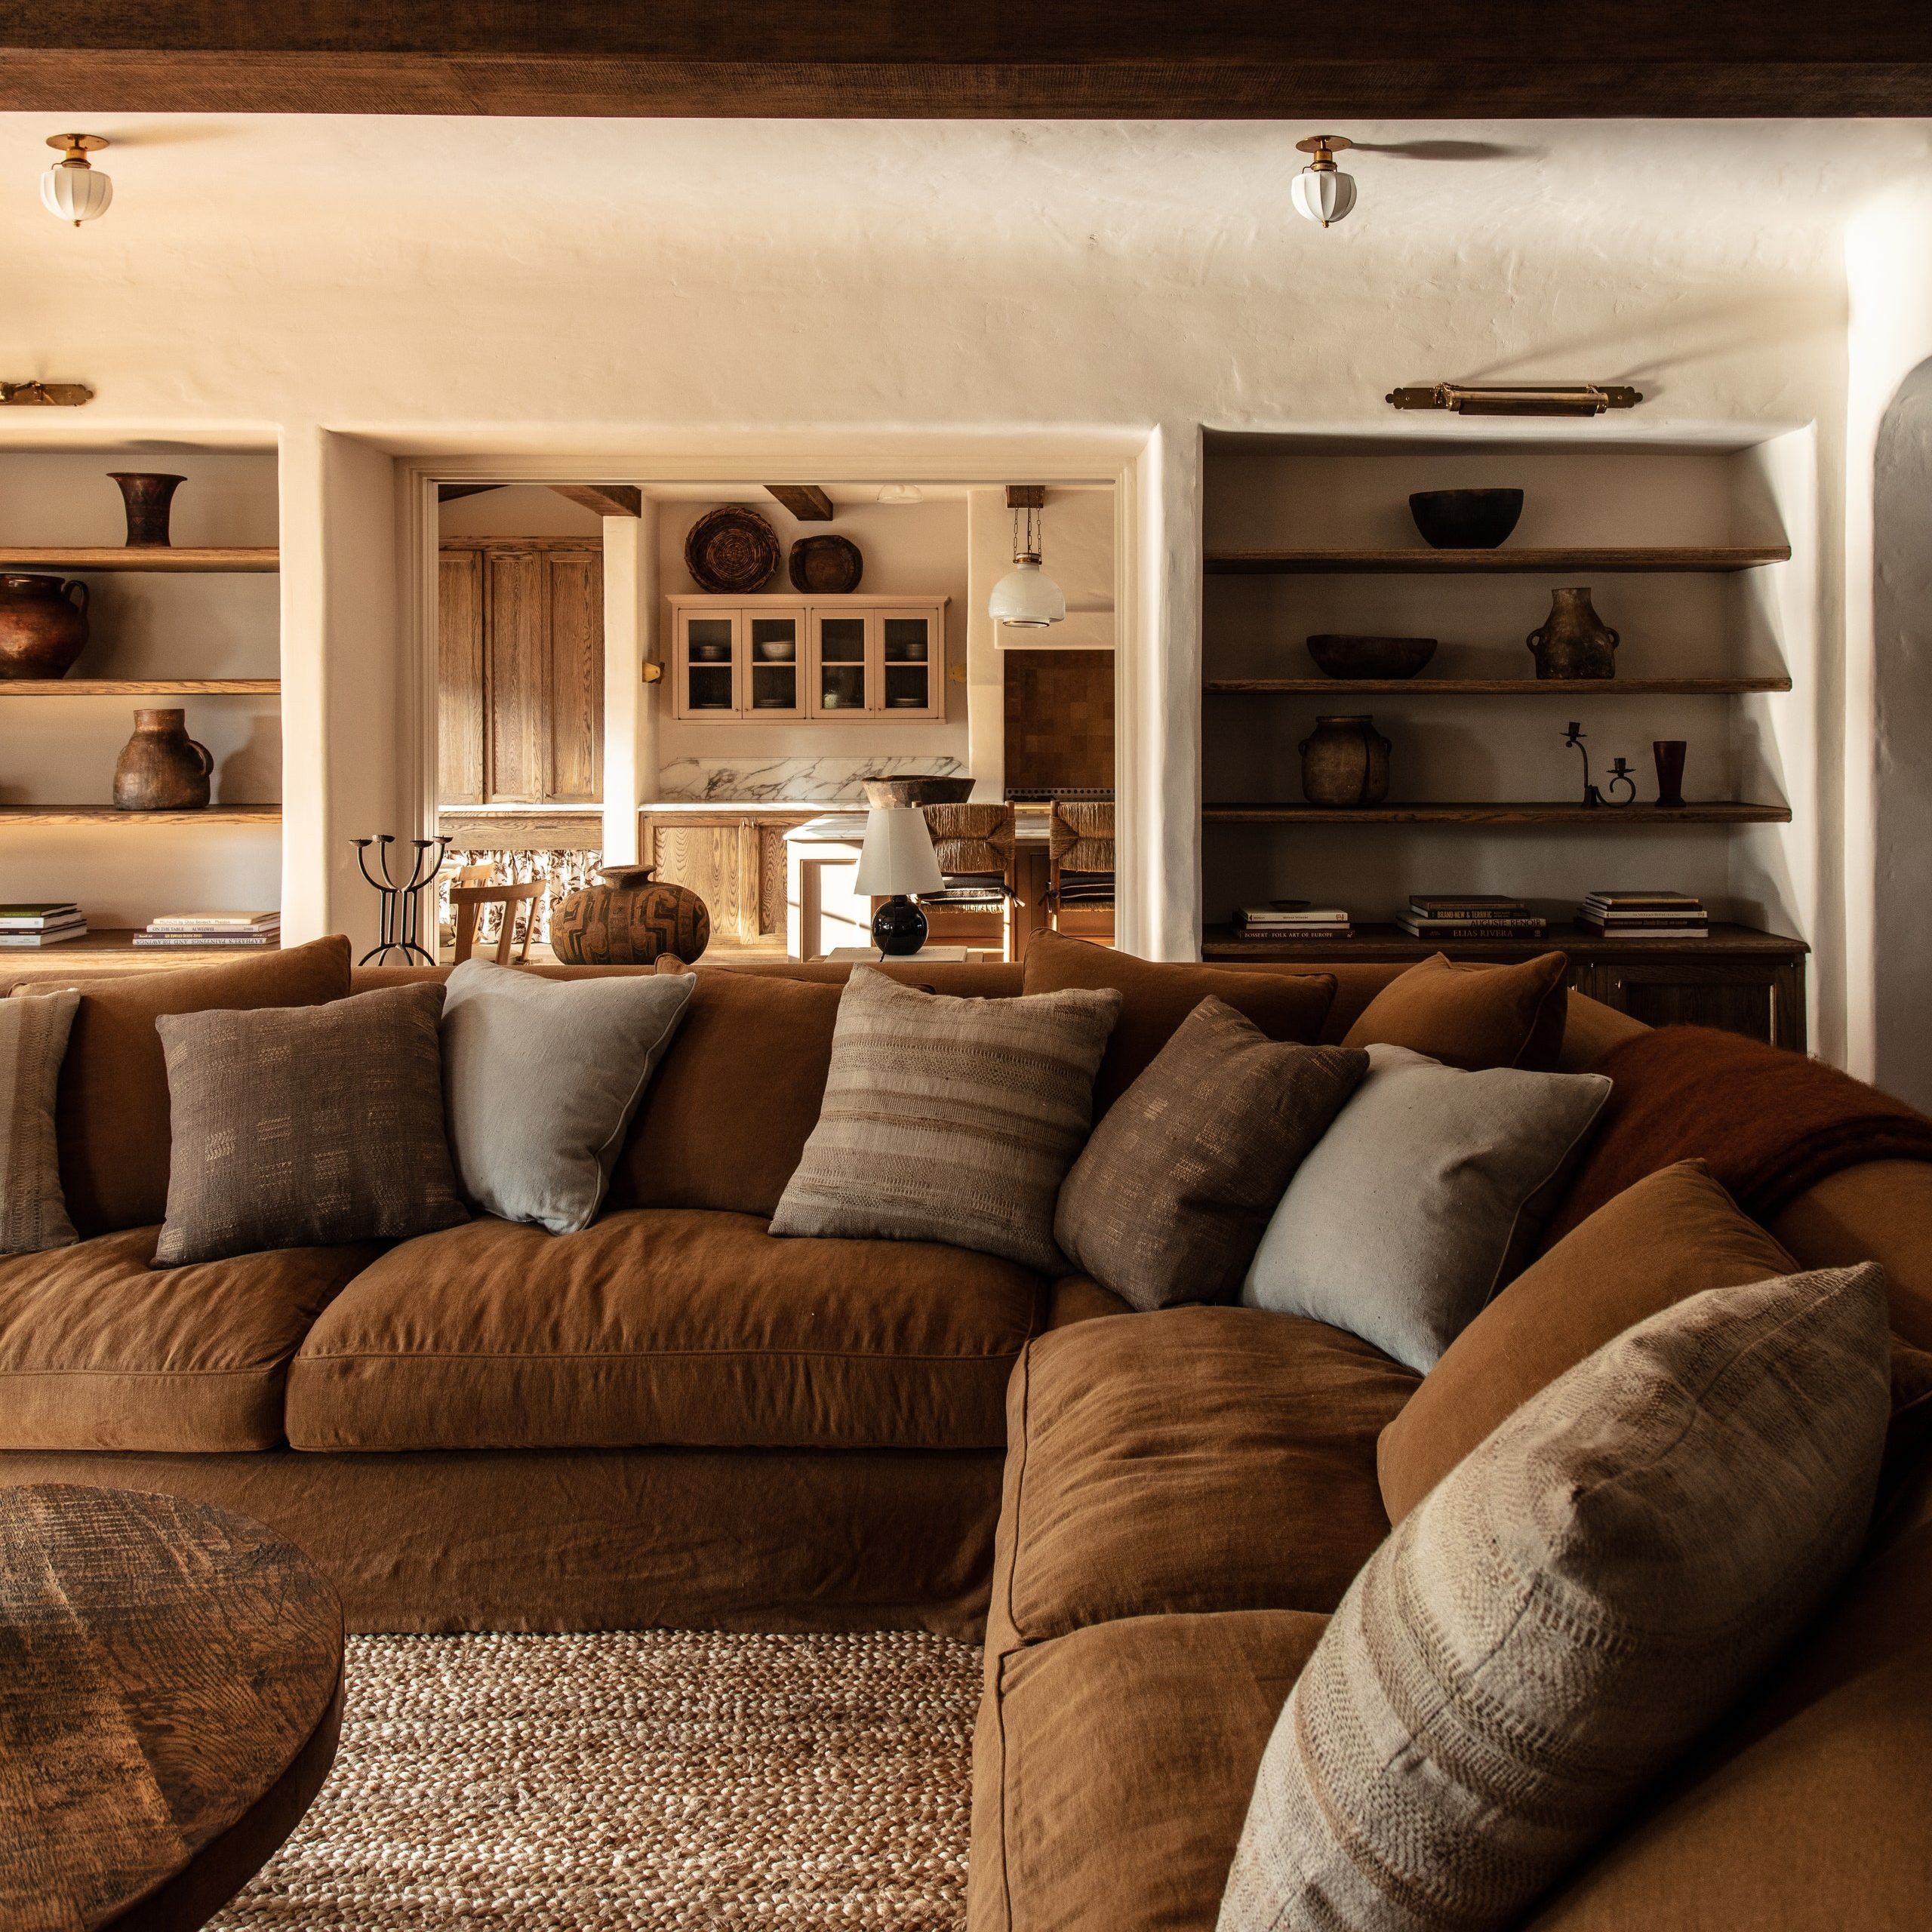 Why Brown Is The Home Decor Color Of 2022 | Vogue Within Sofas In Chocolate Brown (View 10 of 15)